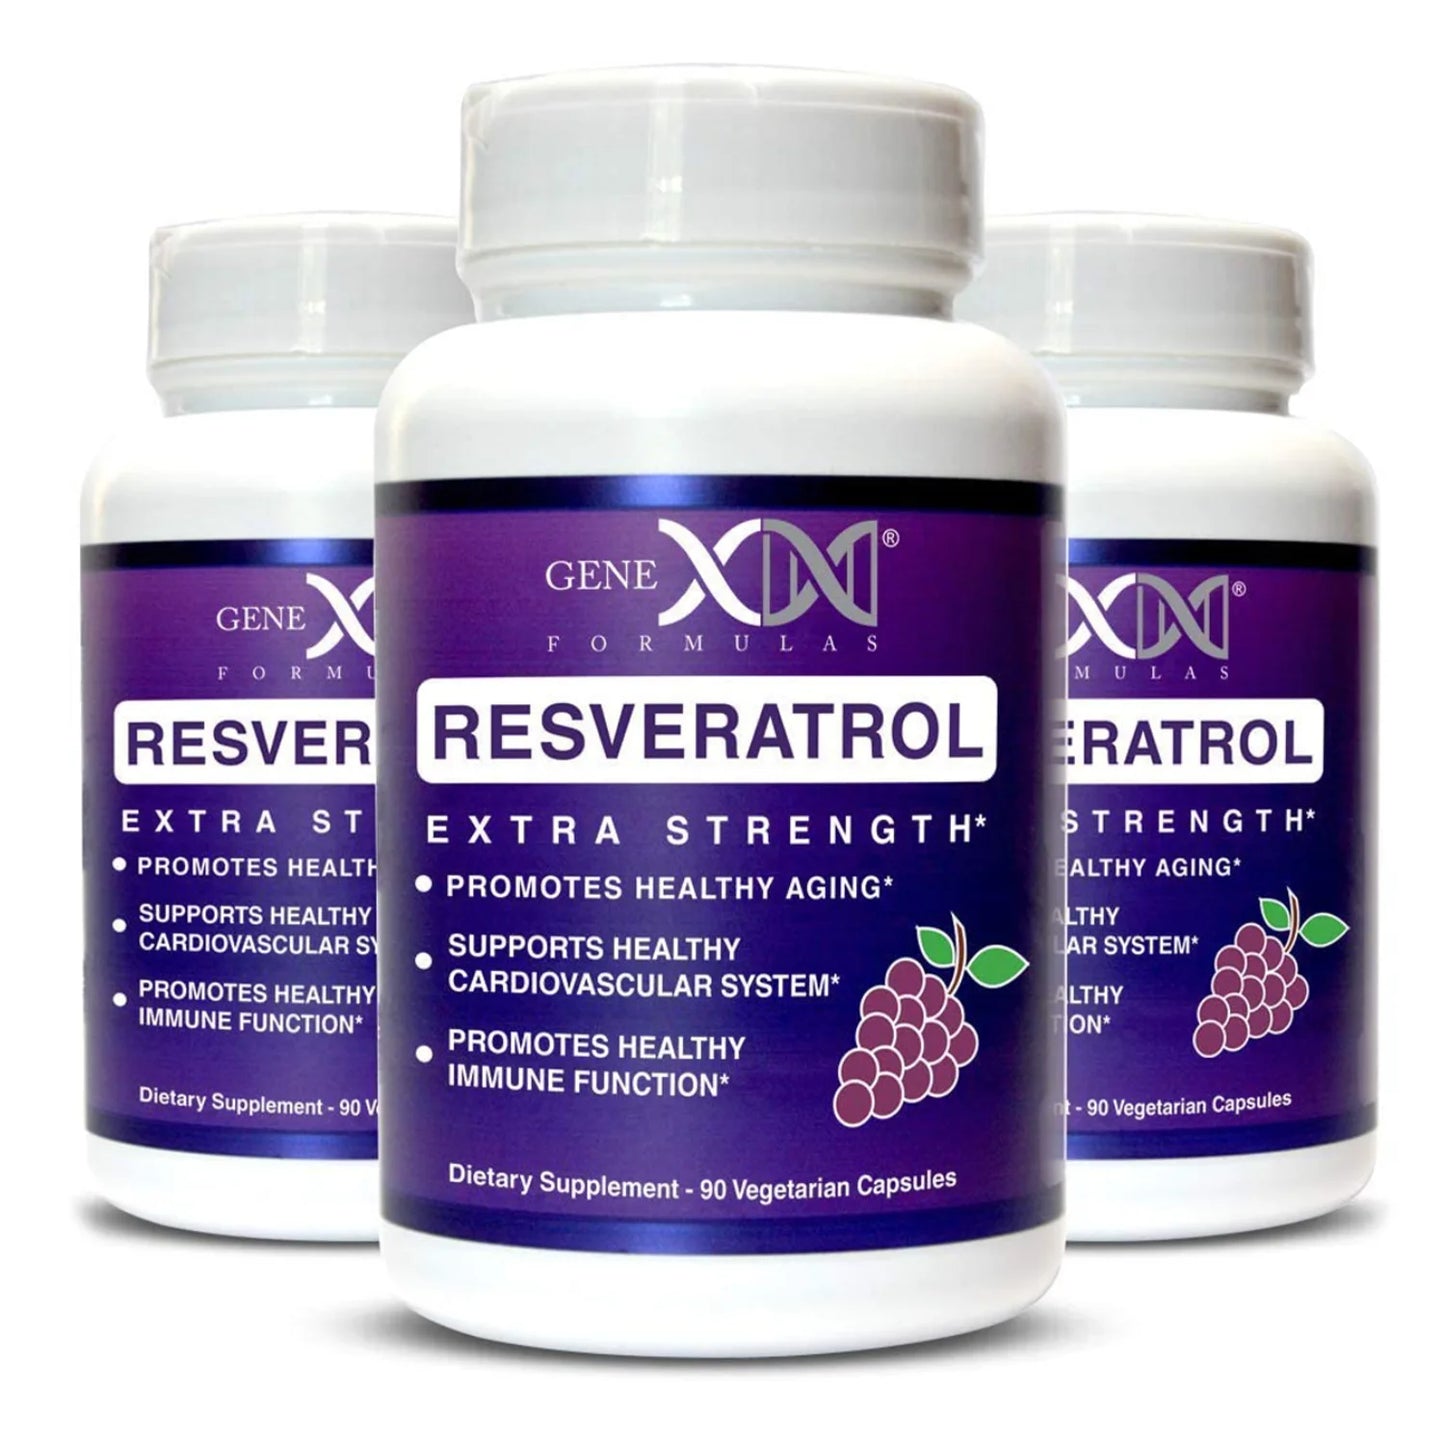 Genex Resveratrol extra strength capsules in a 3 pack (three bottles). Each bottle contains 90 vegetarian capsules. 